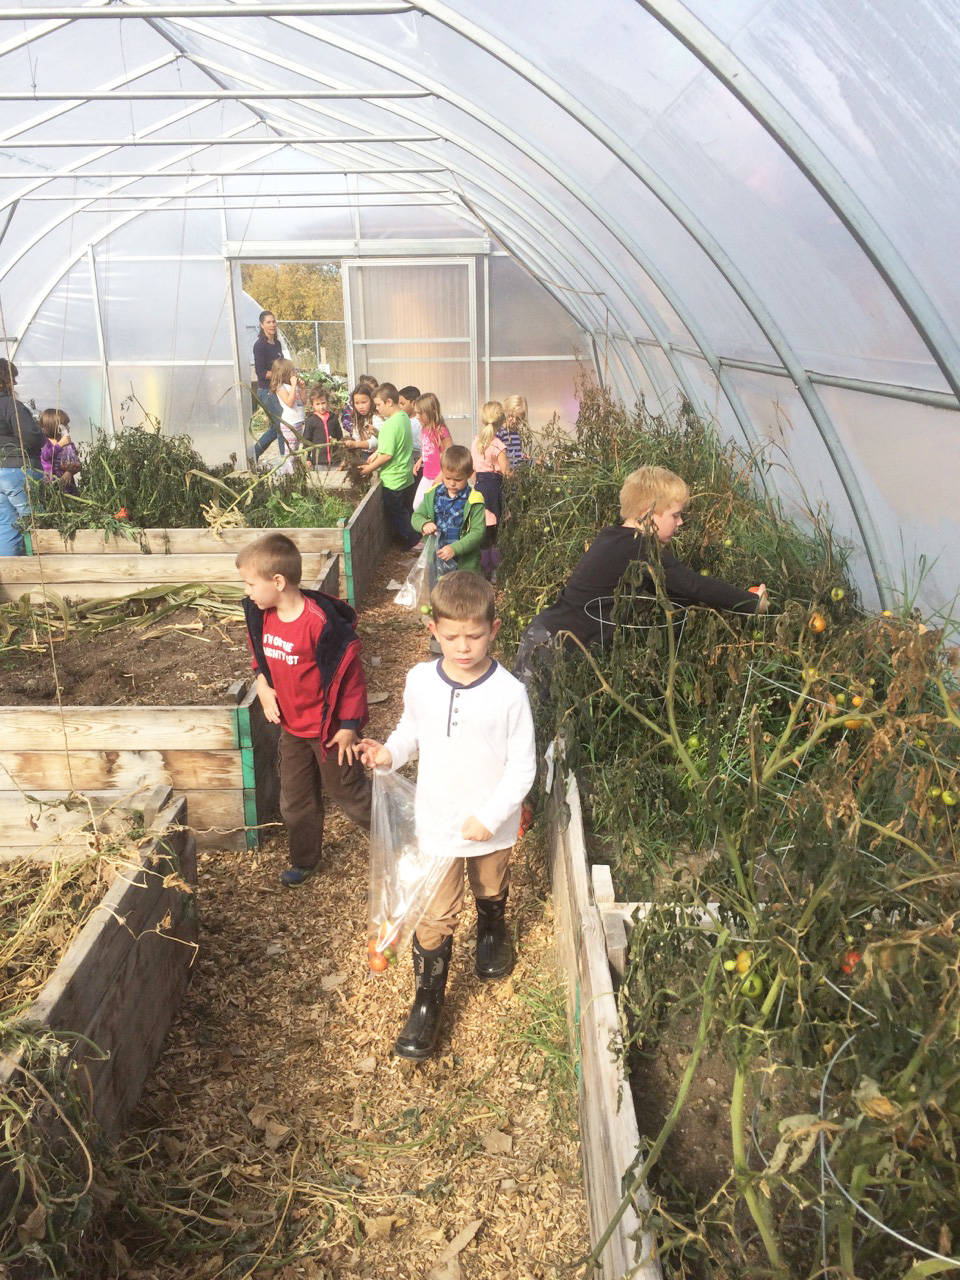 Students dig in to finish harvesting garden produce